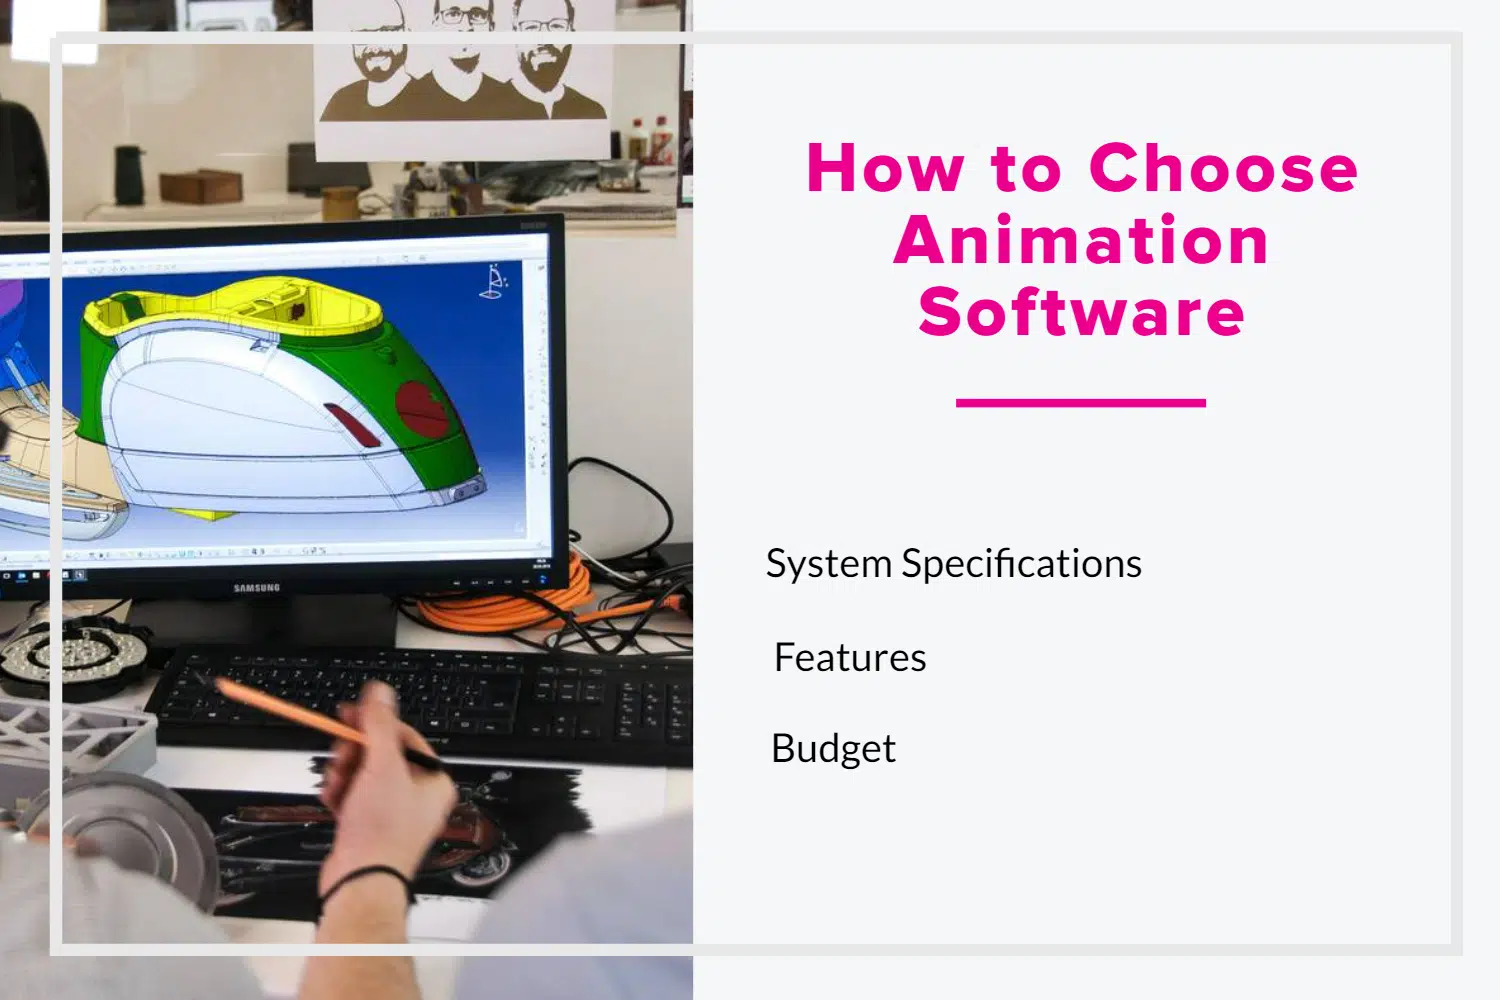 How to choose animation software